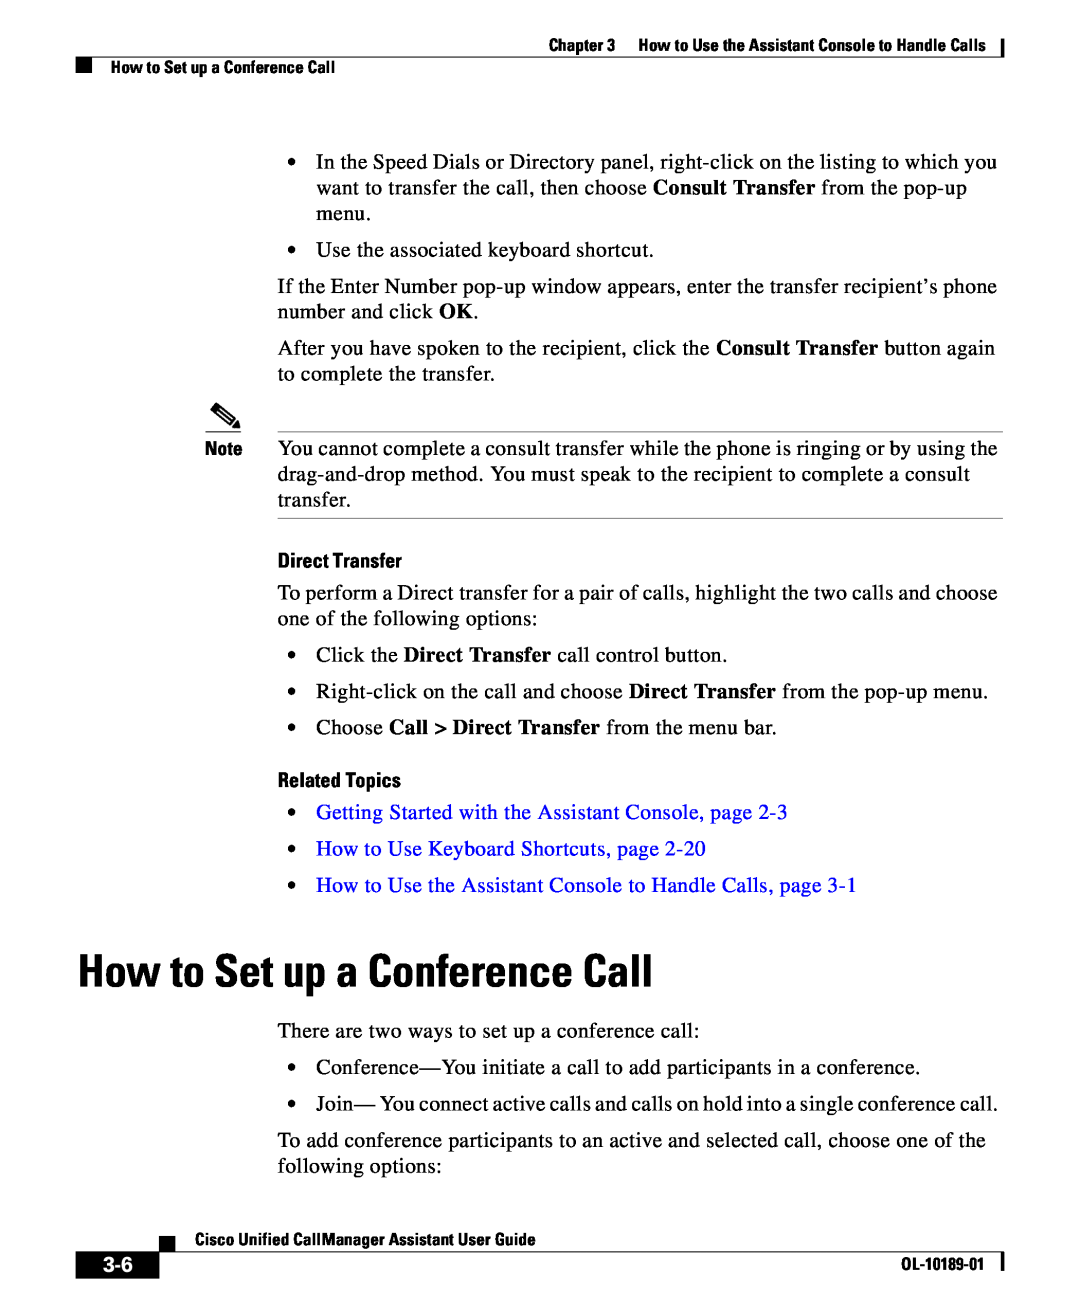 Cisco Systems OL-10189-01 manual How to Set up a Conference Call, Direct Transfer, Related Topics 